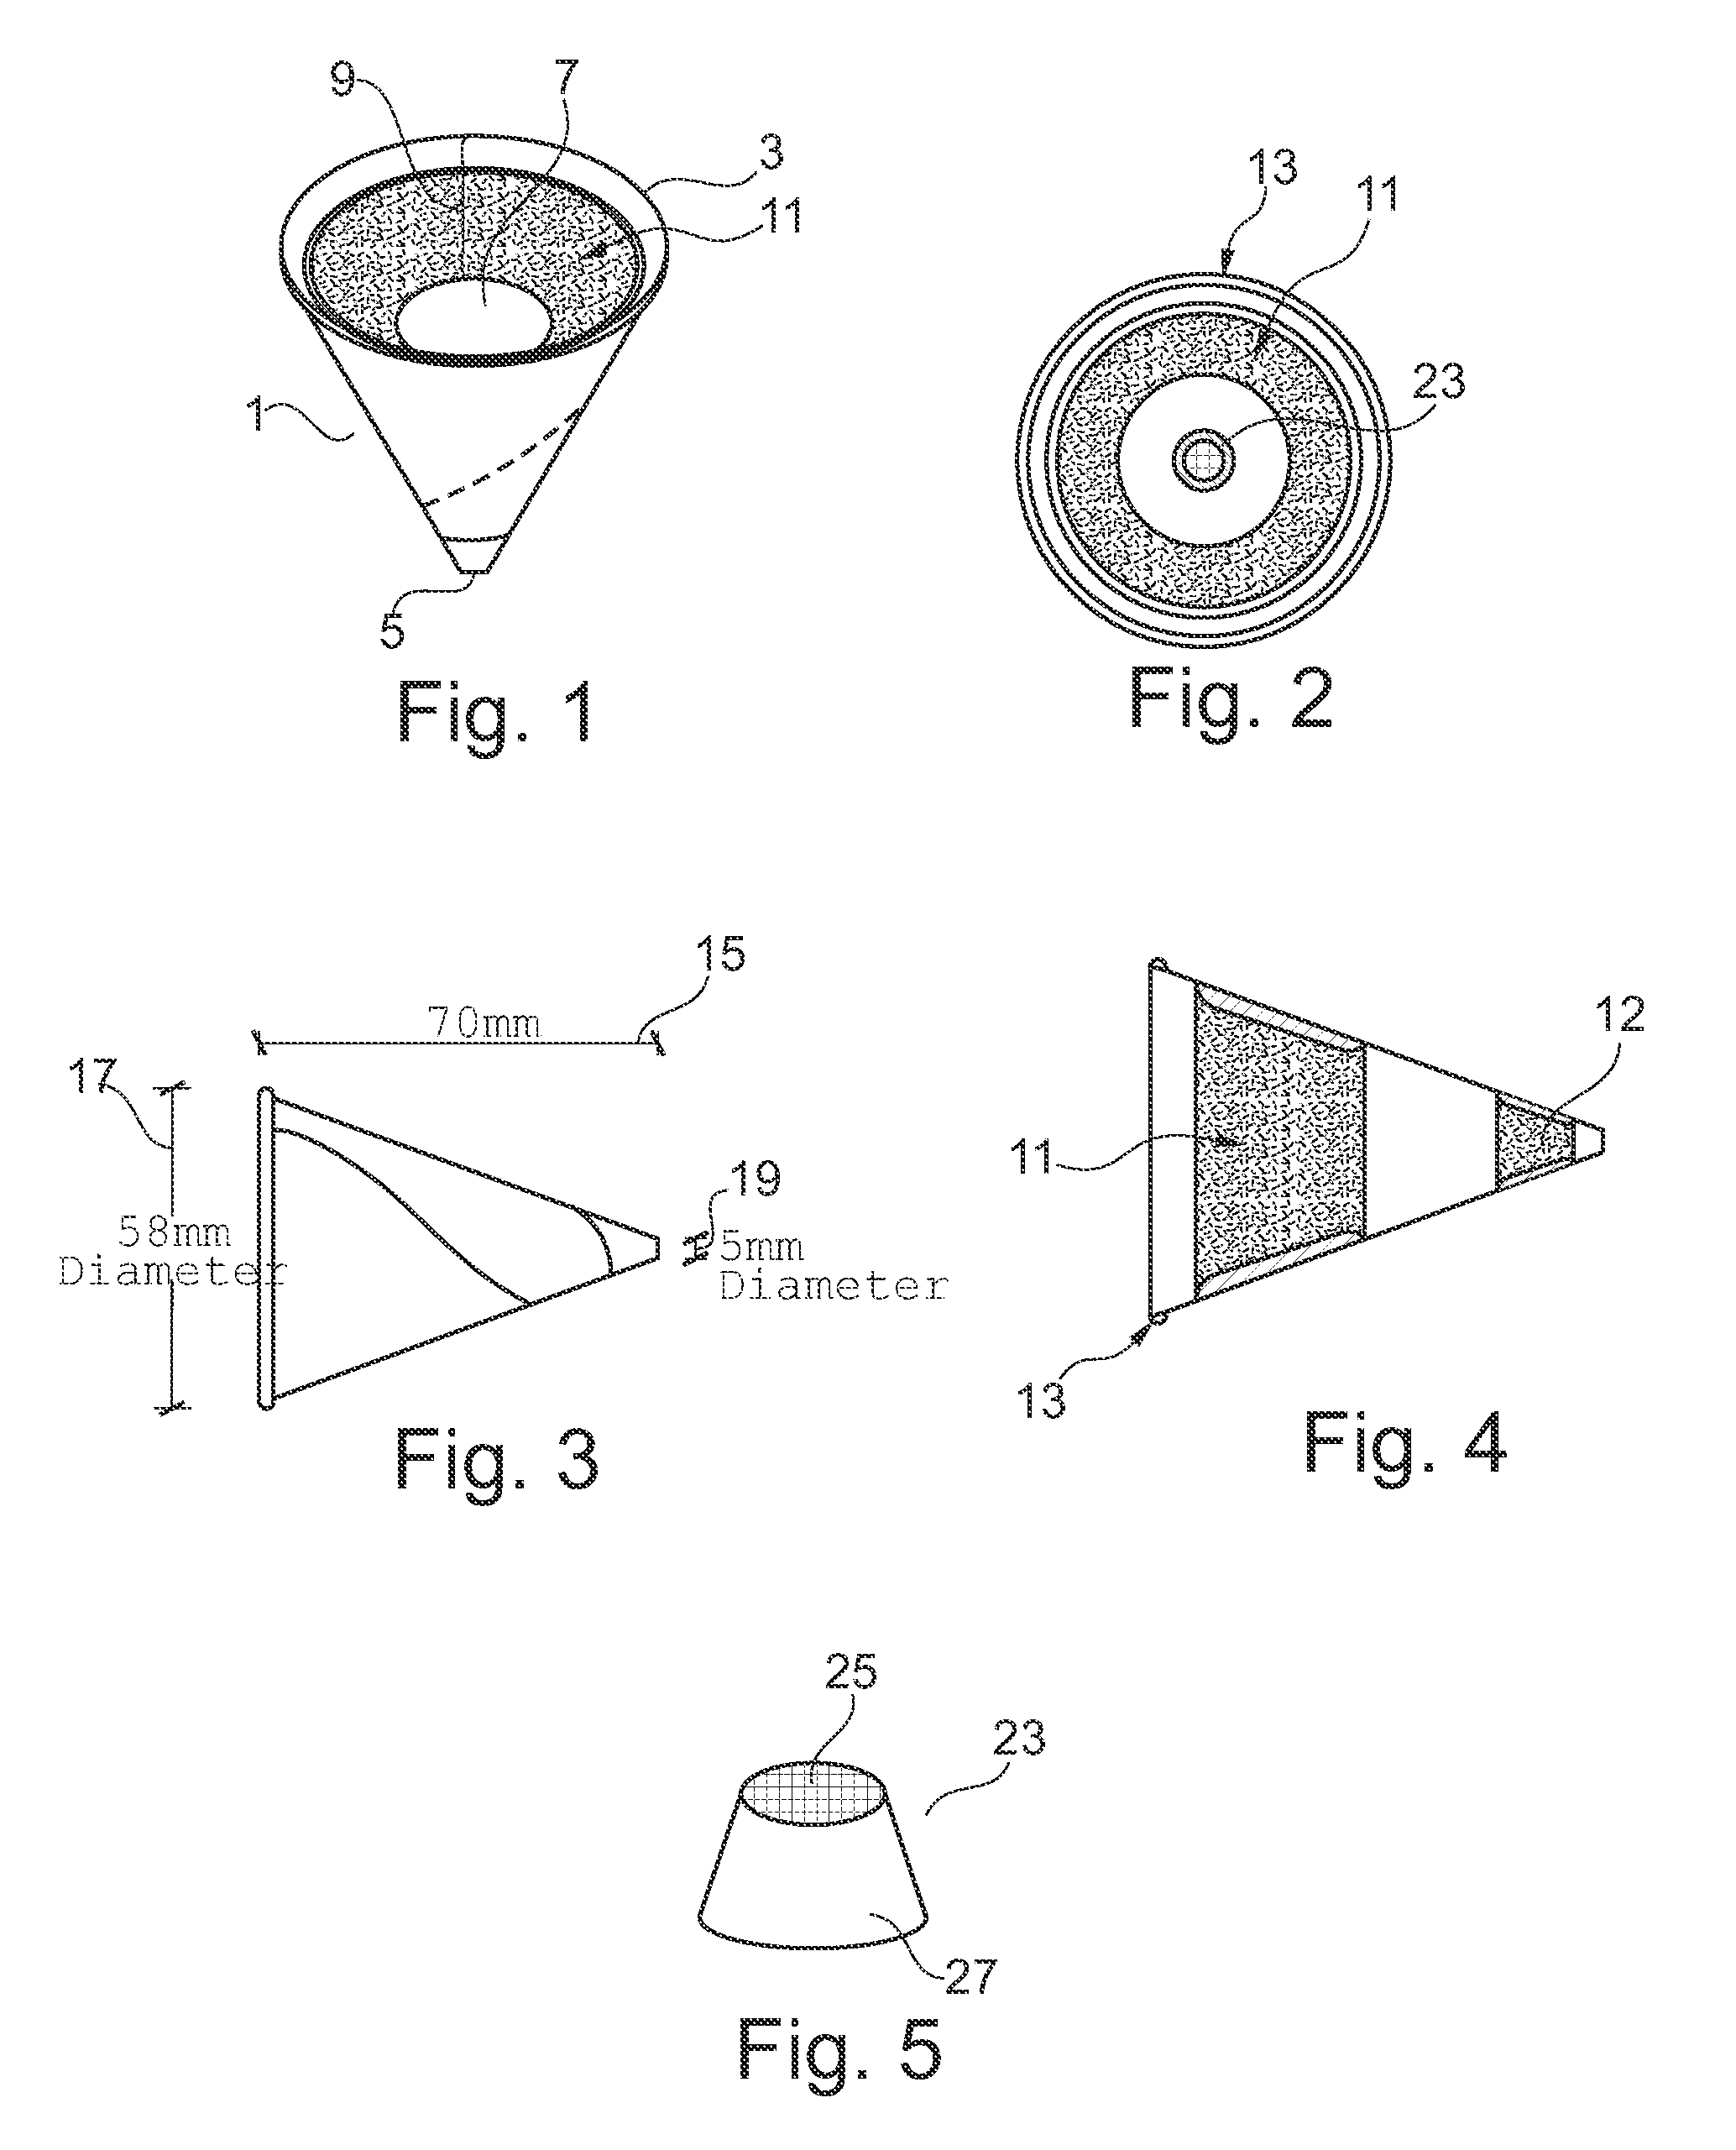 Urinary device having antiseptic and health testing properties